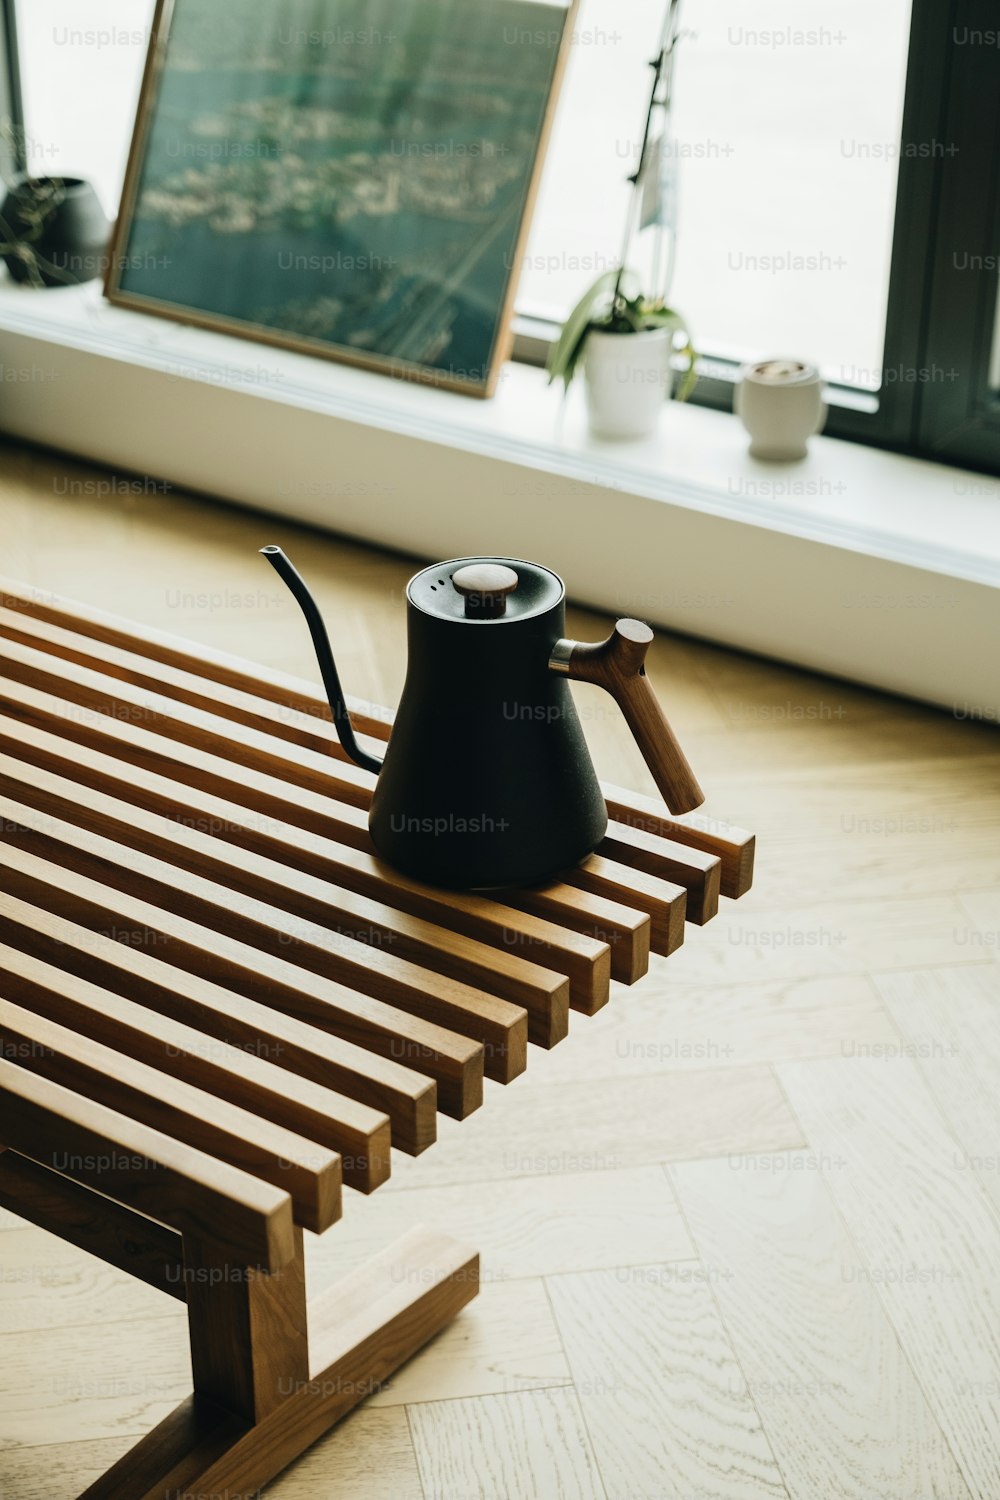 a coffee pot sitting on top of a wooden bench